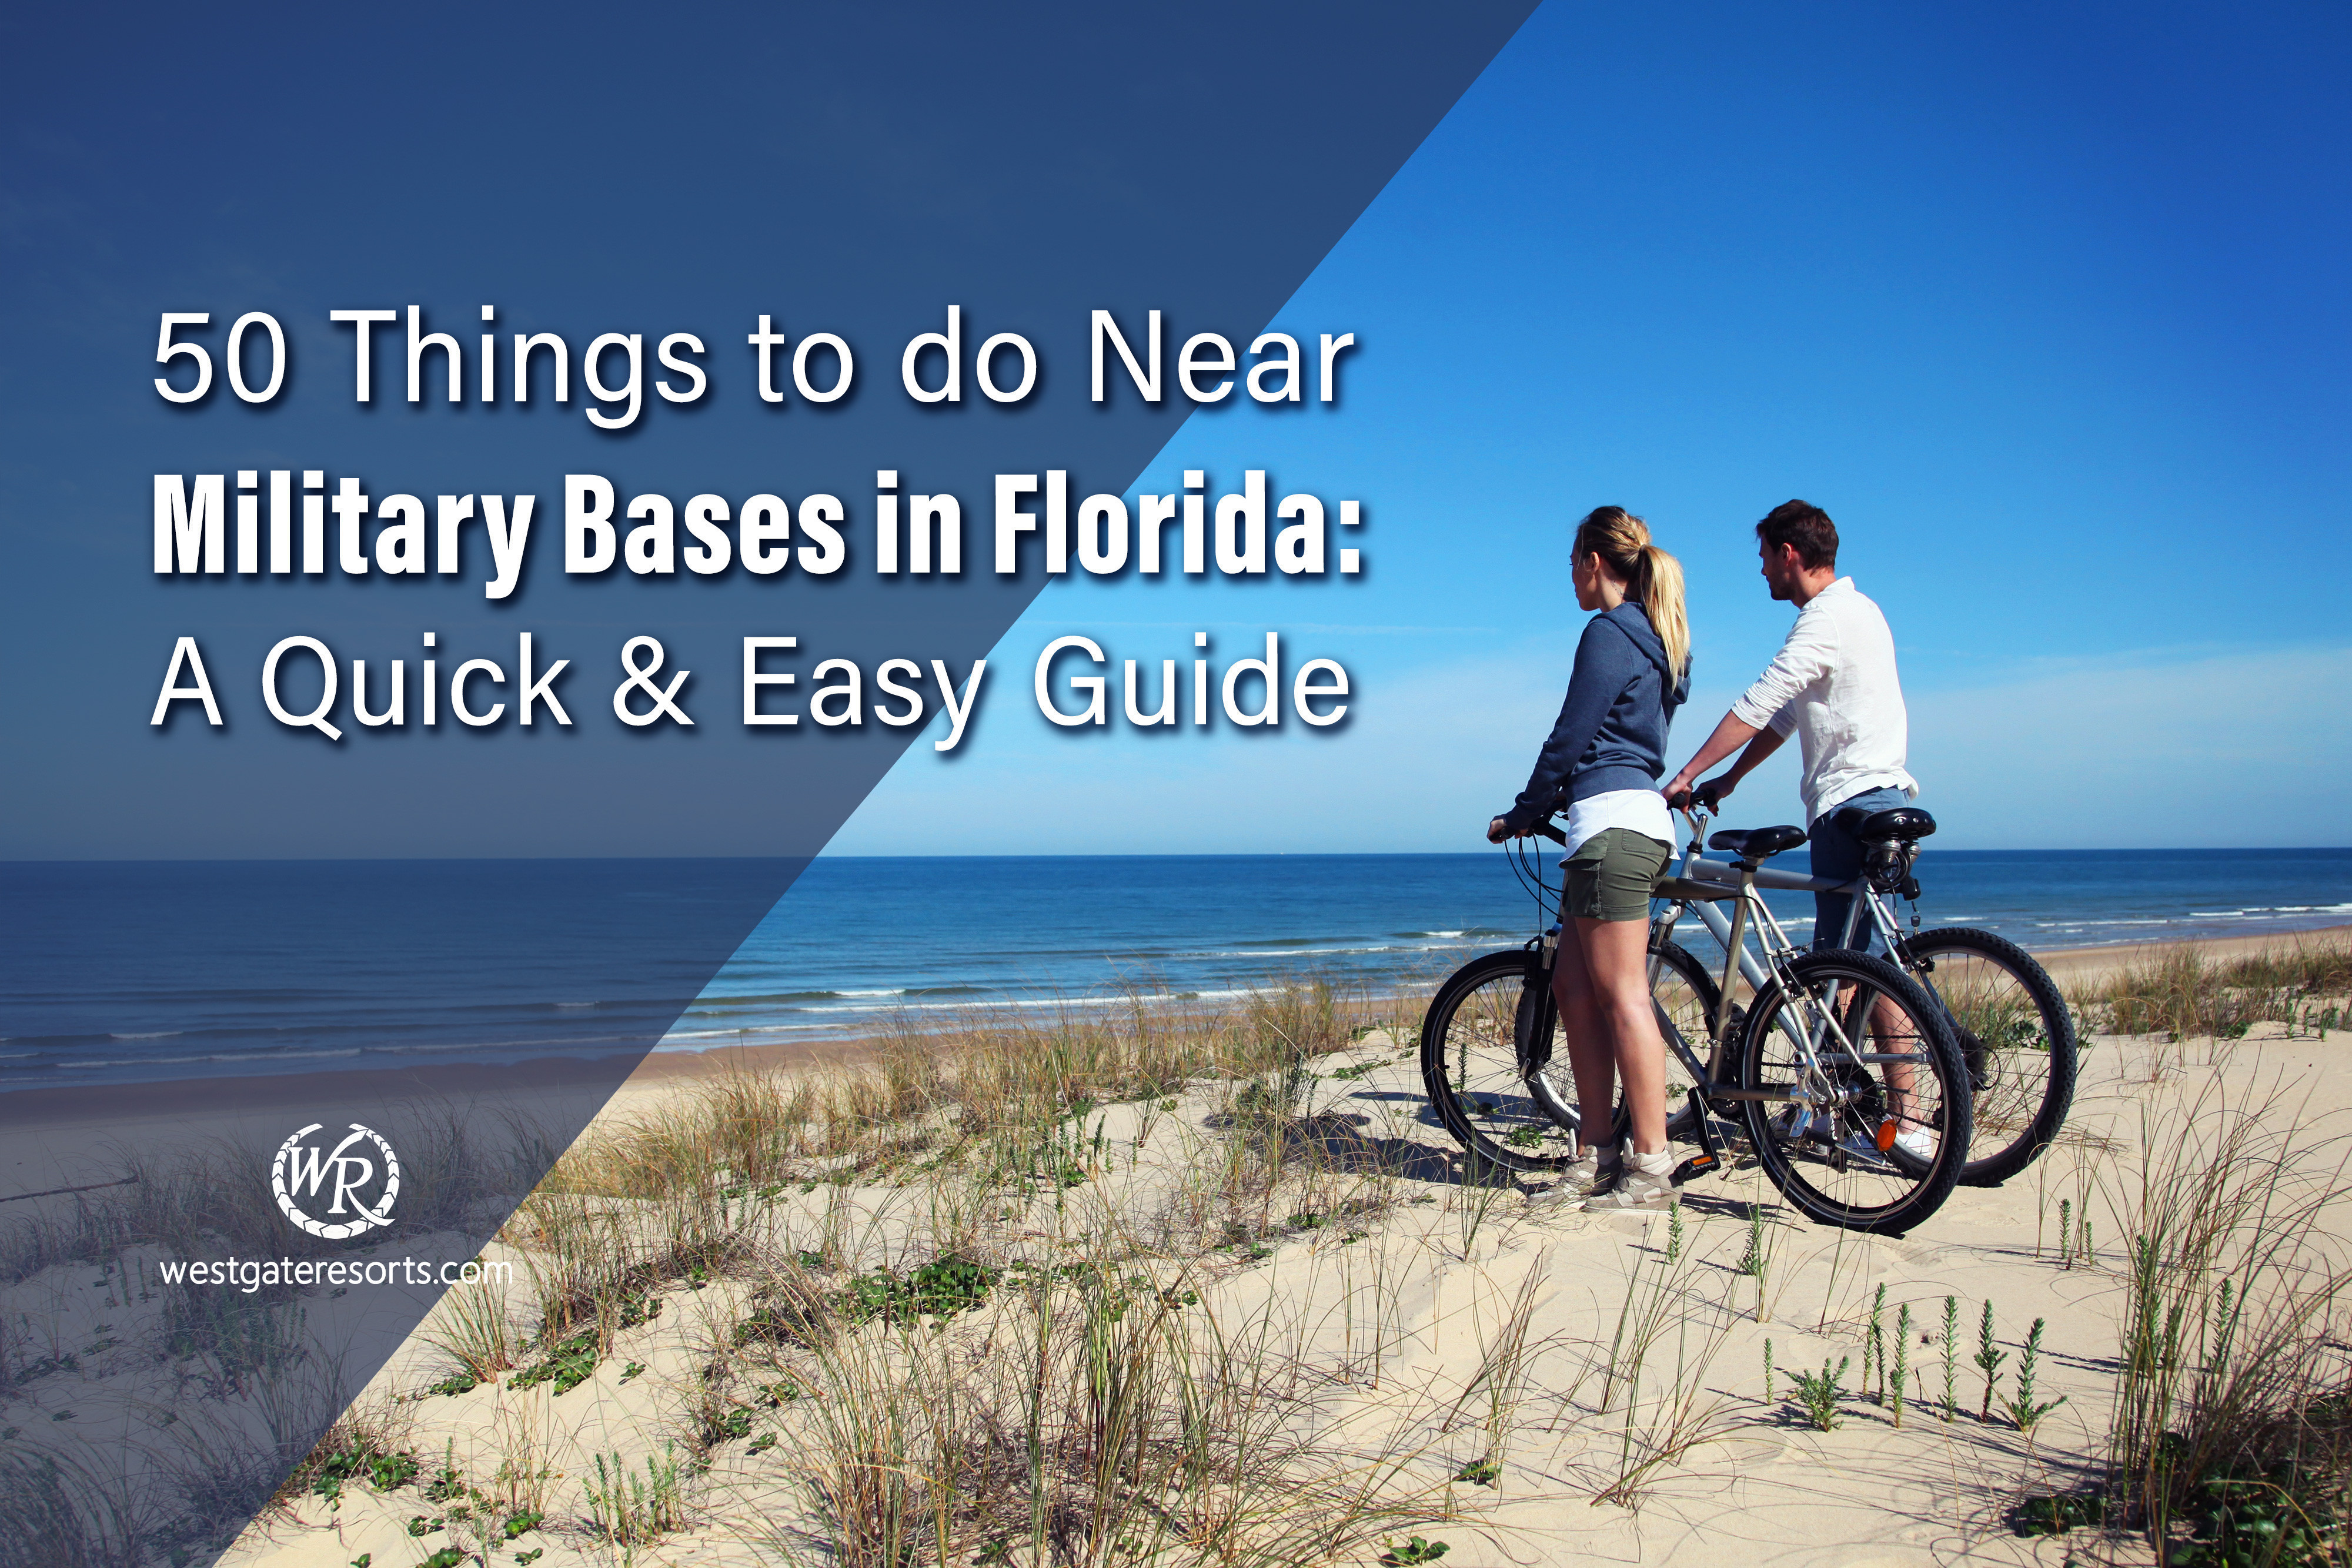 50 Things to do Near Military Bases in Florida: A Quick & Easy Guide